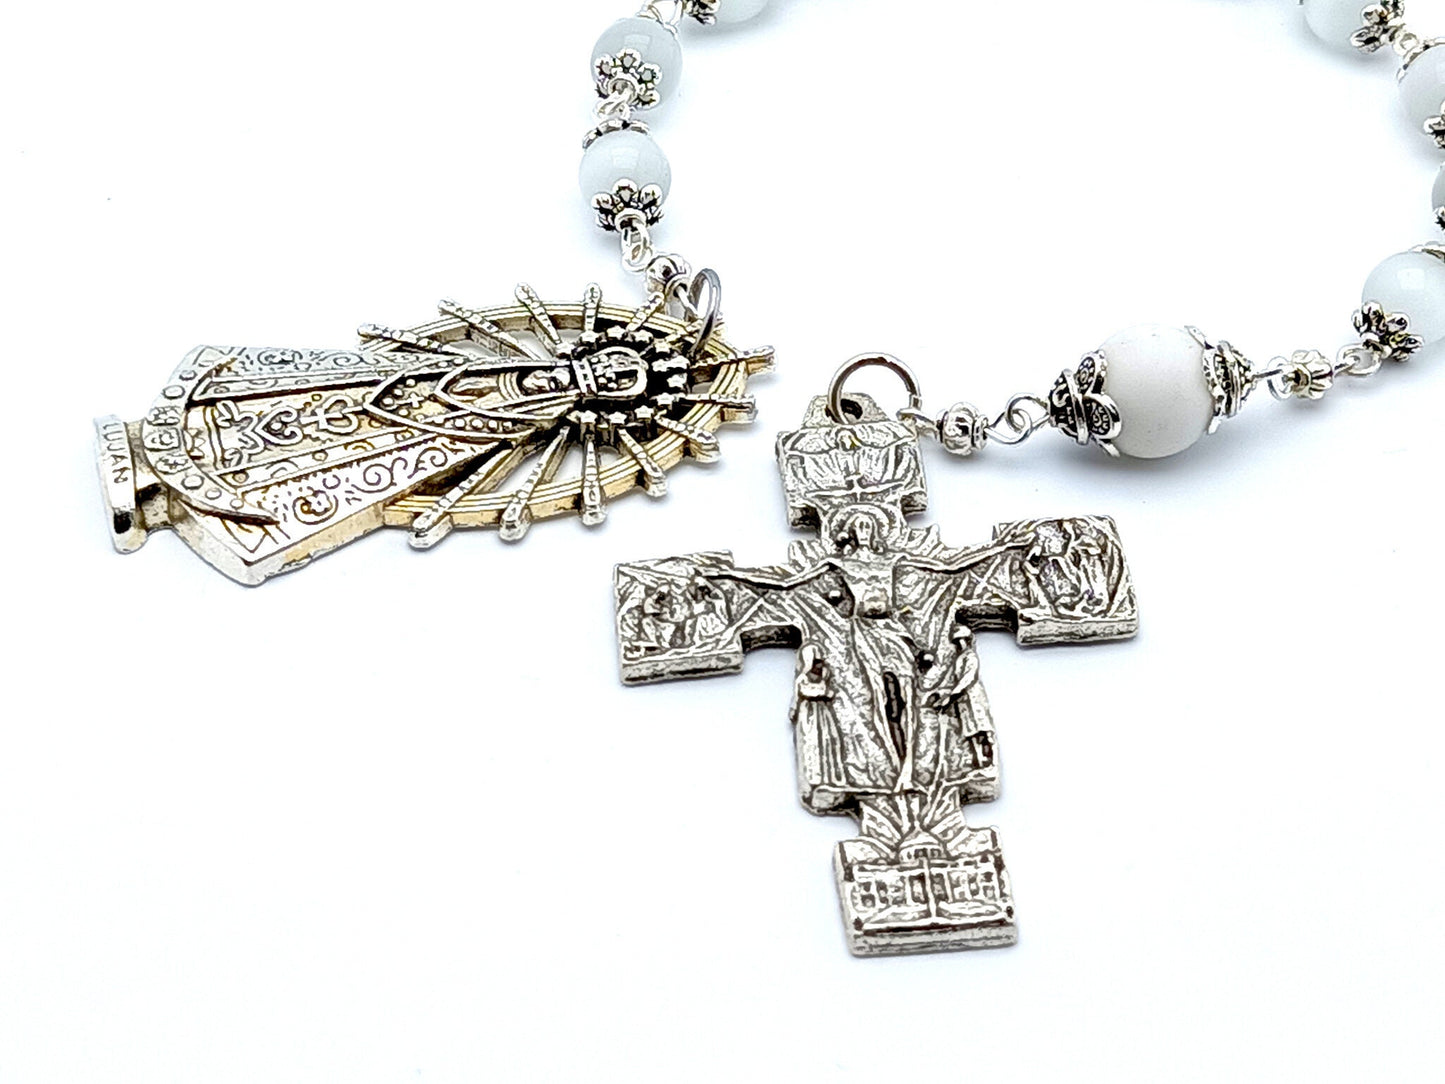 Our Lady of Charity unique rosary beads single decade rosary with opal and white gemstone beads, silver Holy Trinity crucifix and end medal.